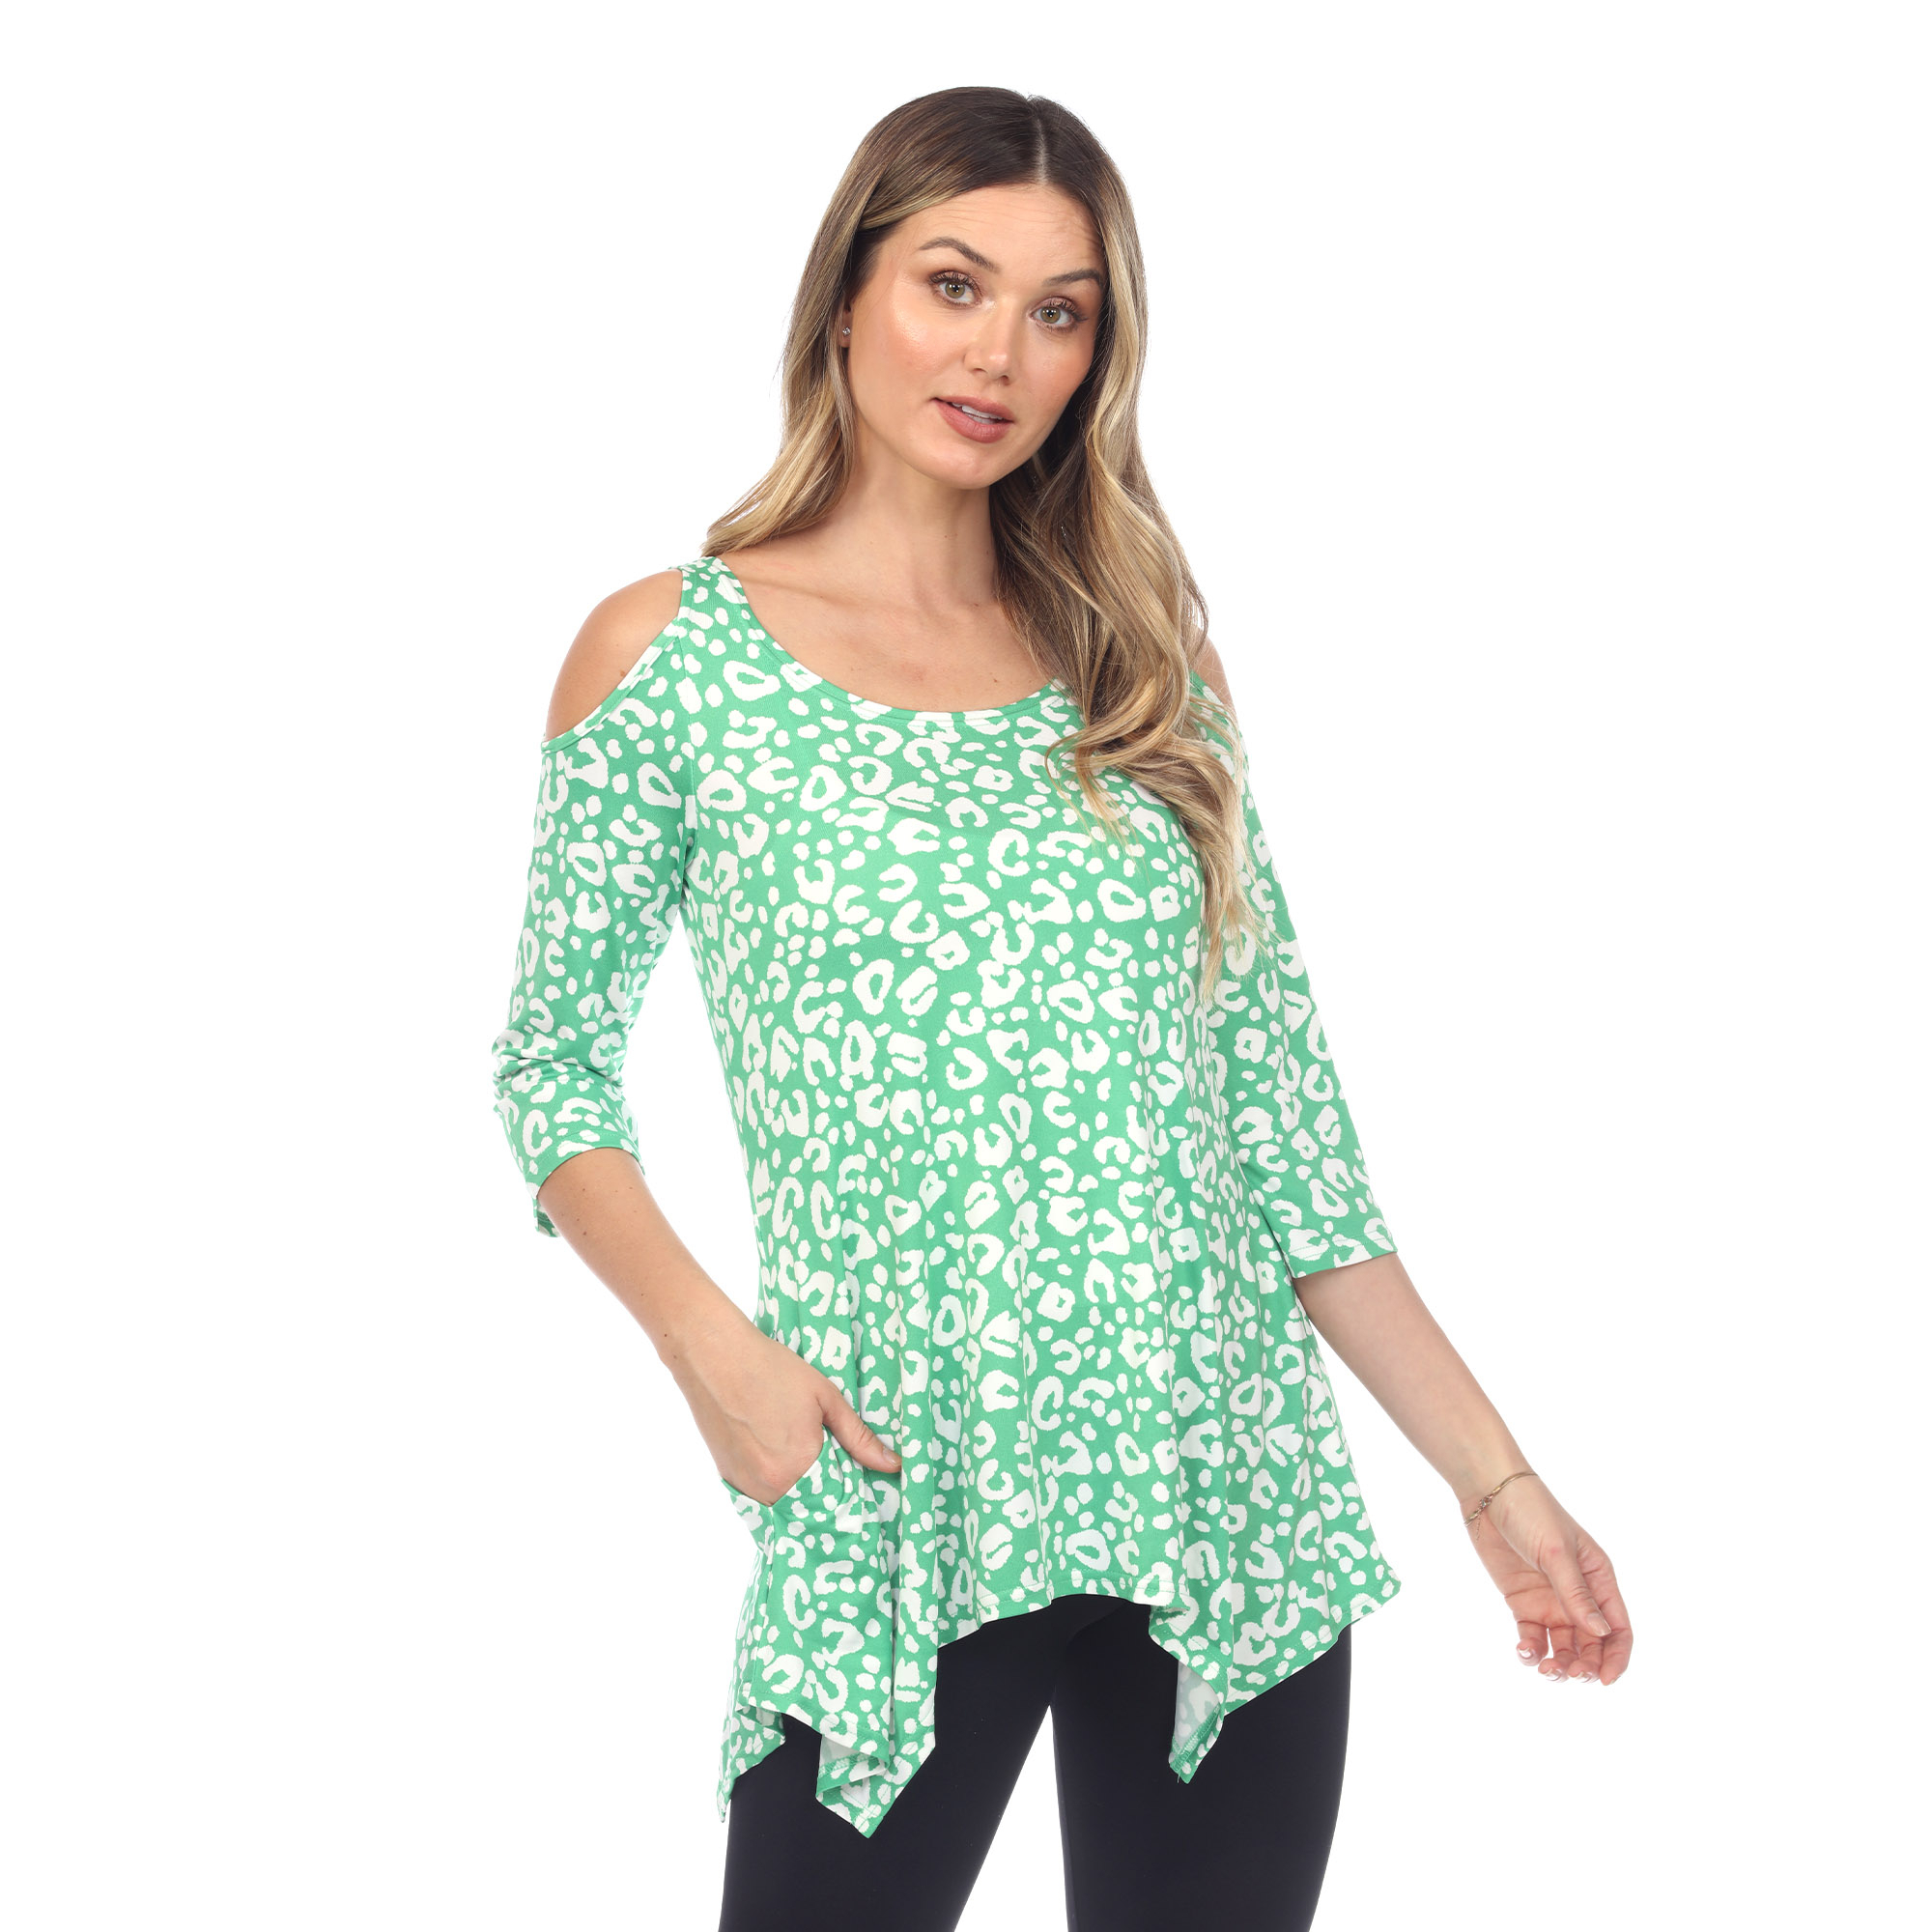 White Mark Women's Leopard Print Cold Shoulder Tunic Top With Pockets - Green, 3X